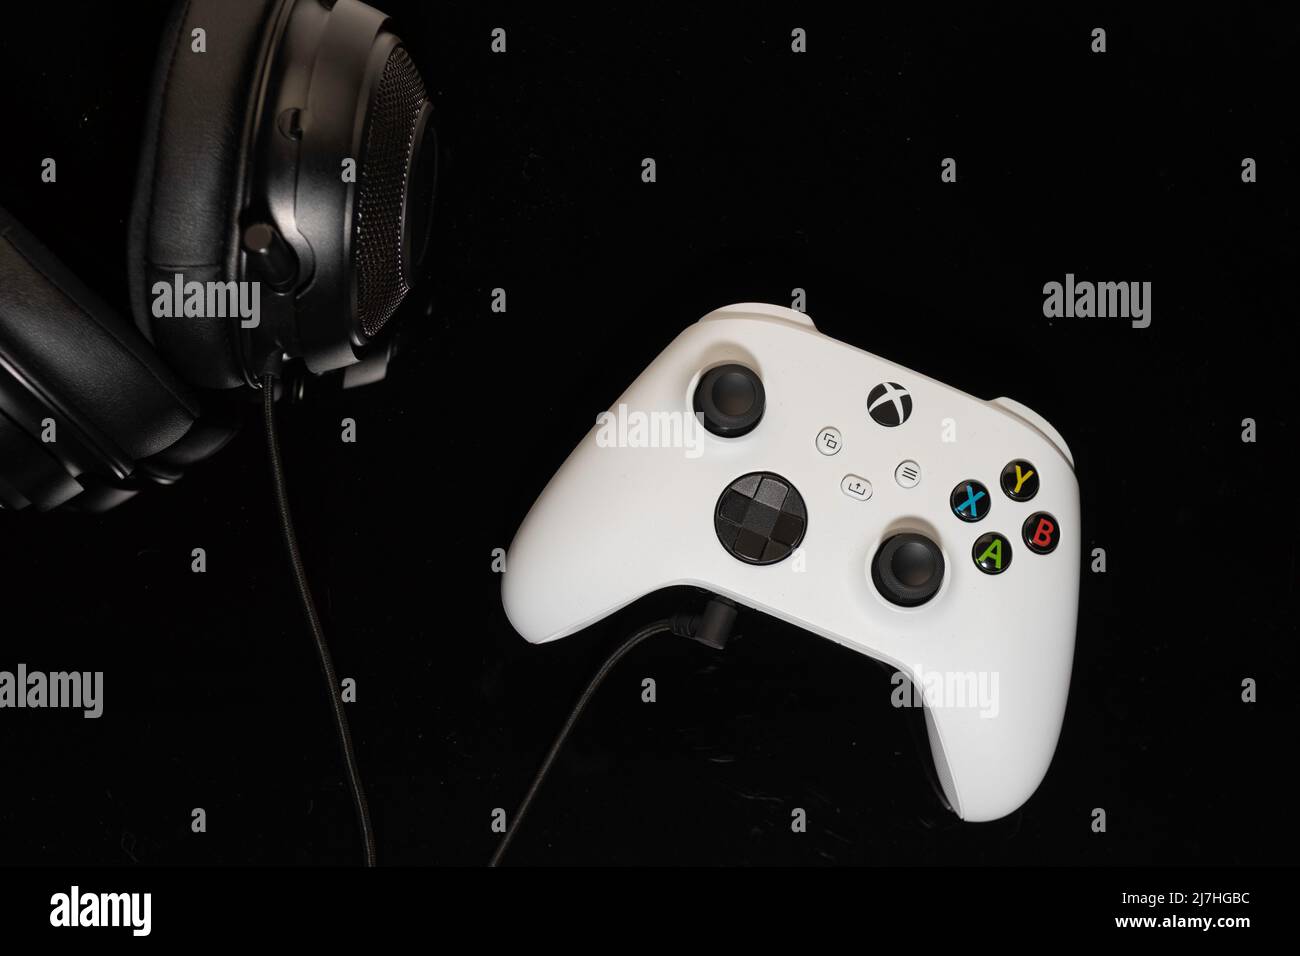 Microsoft Xbox gaming controller with headphones on black background Stock Photo